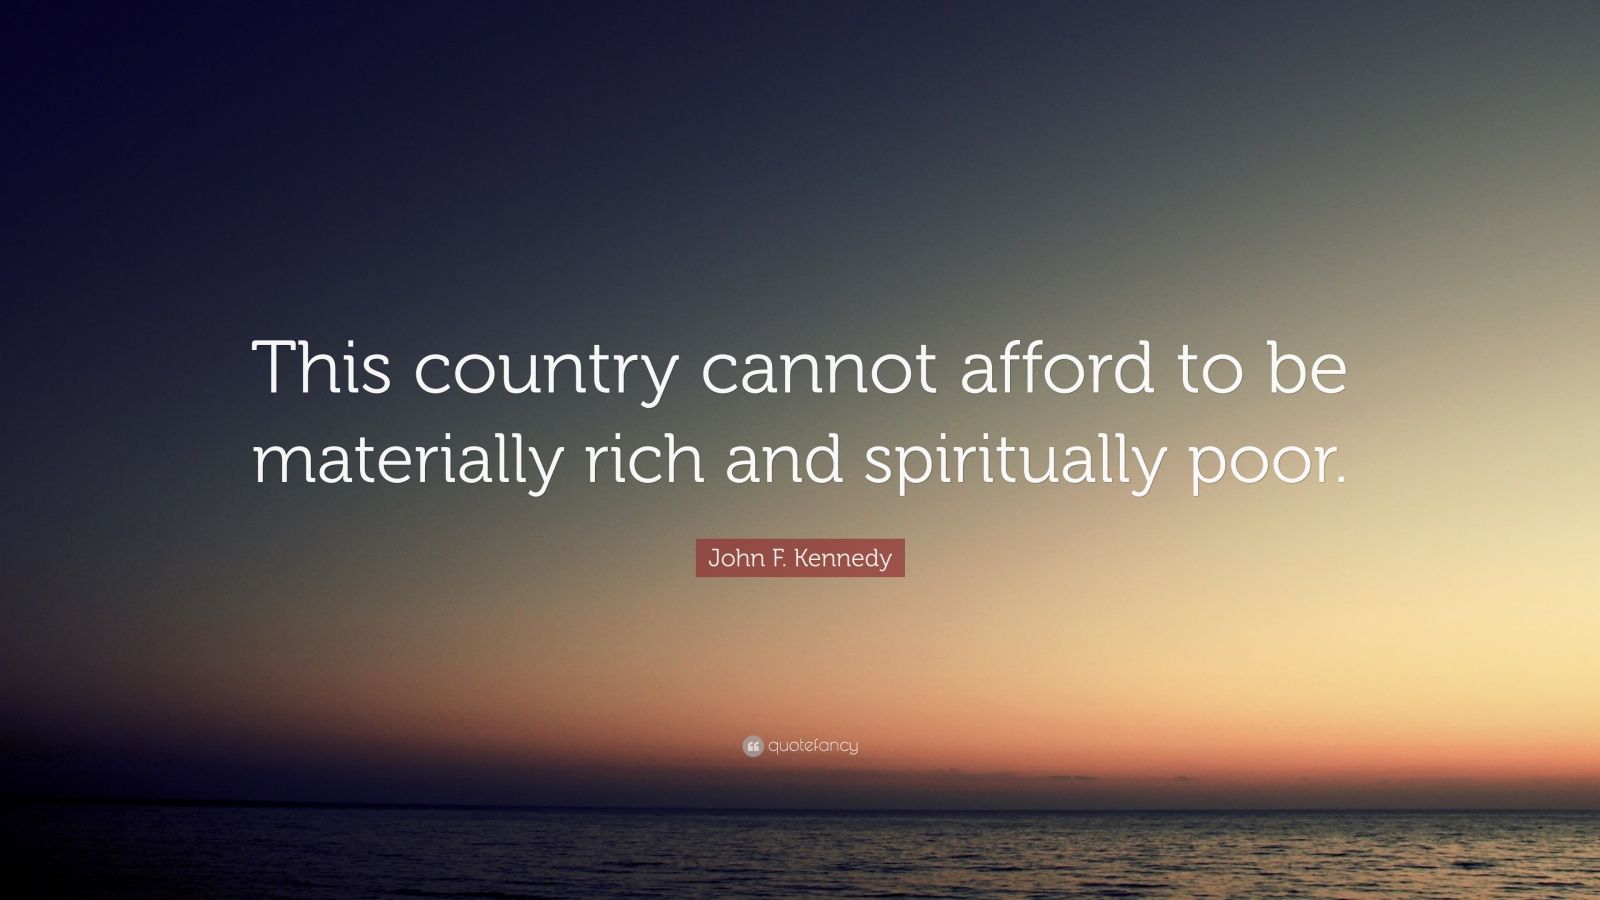 John F. Kennedy Quote: “This country cannot afford to be materially ...